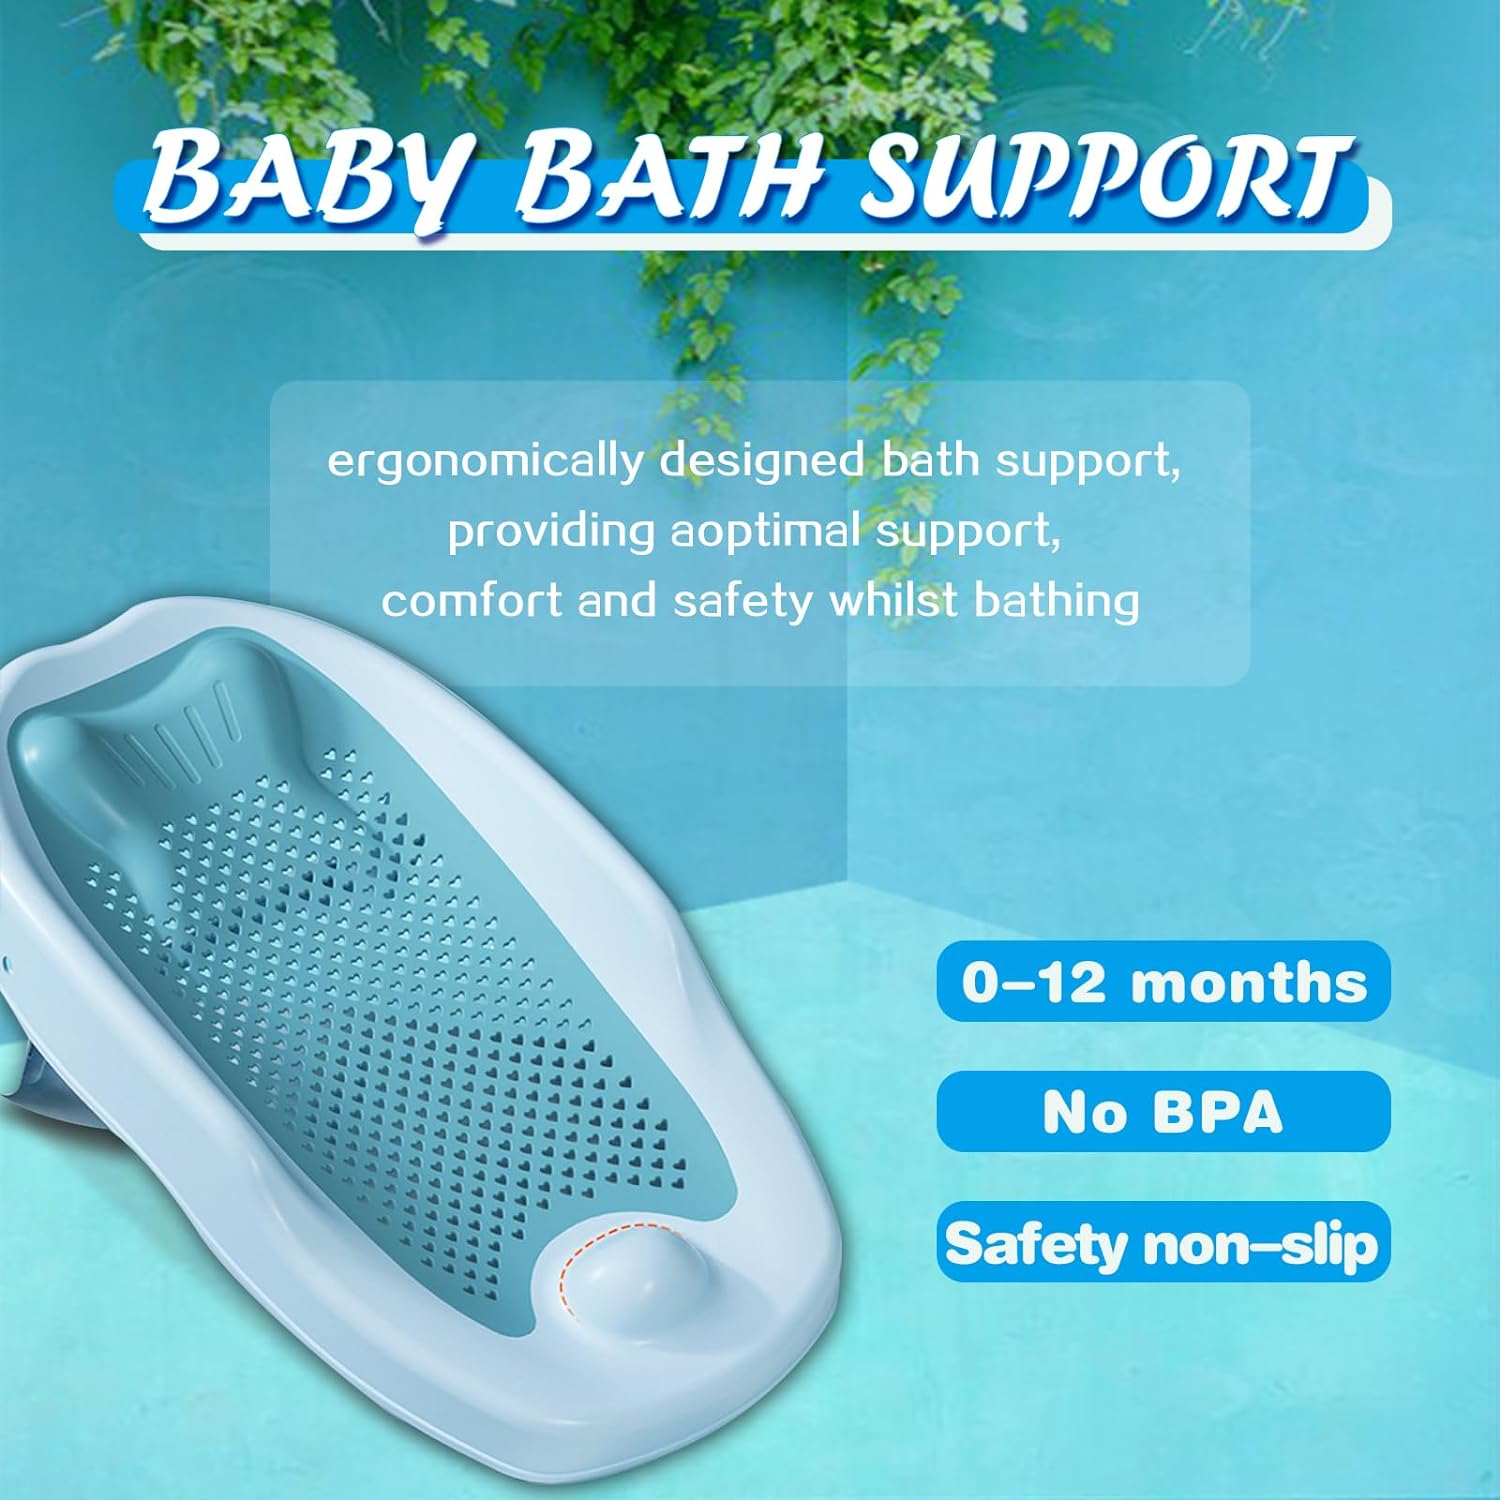 Baby Bath Support, DMG Baby Bather Support for Bath tub or Sink Slip-Resistant, Baby Bath Seat Mat, Ergonomic for Newborn Infant, for Newborn, 0-12 Months Baby